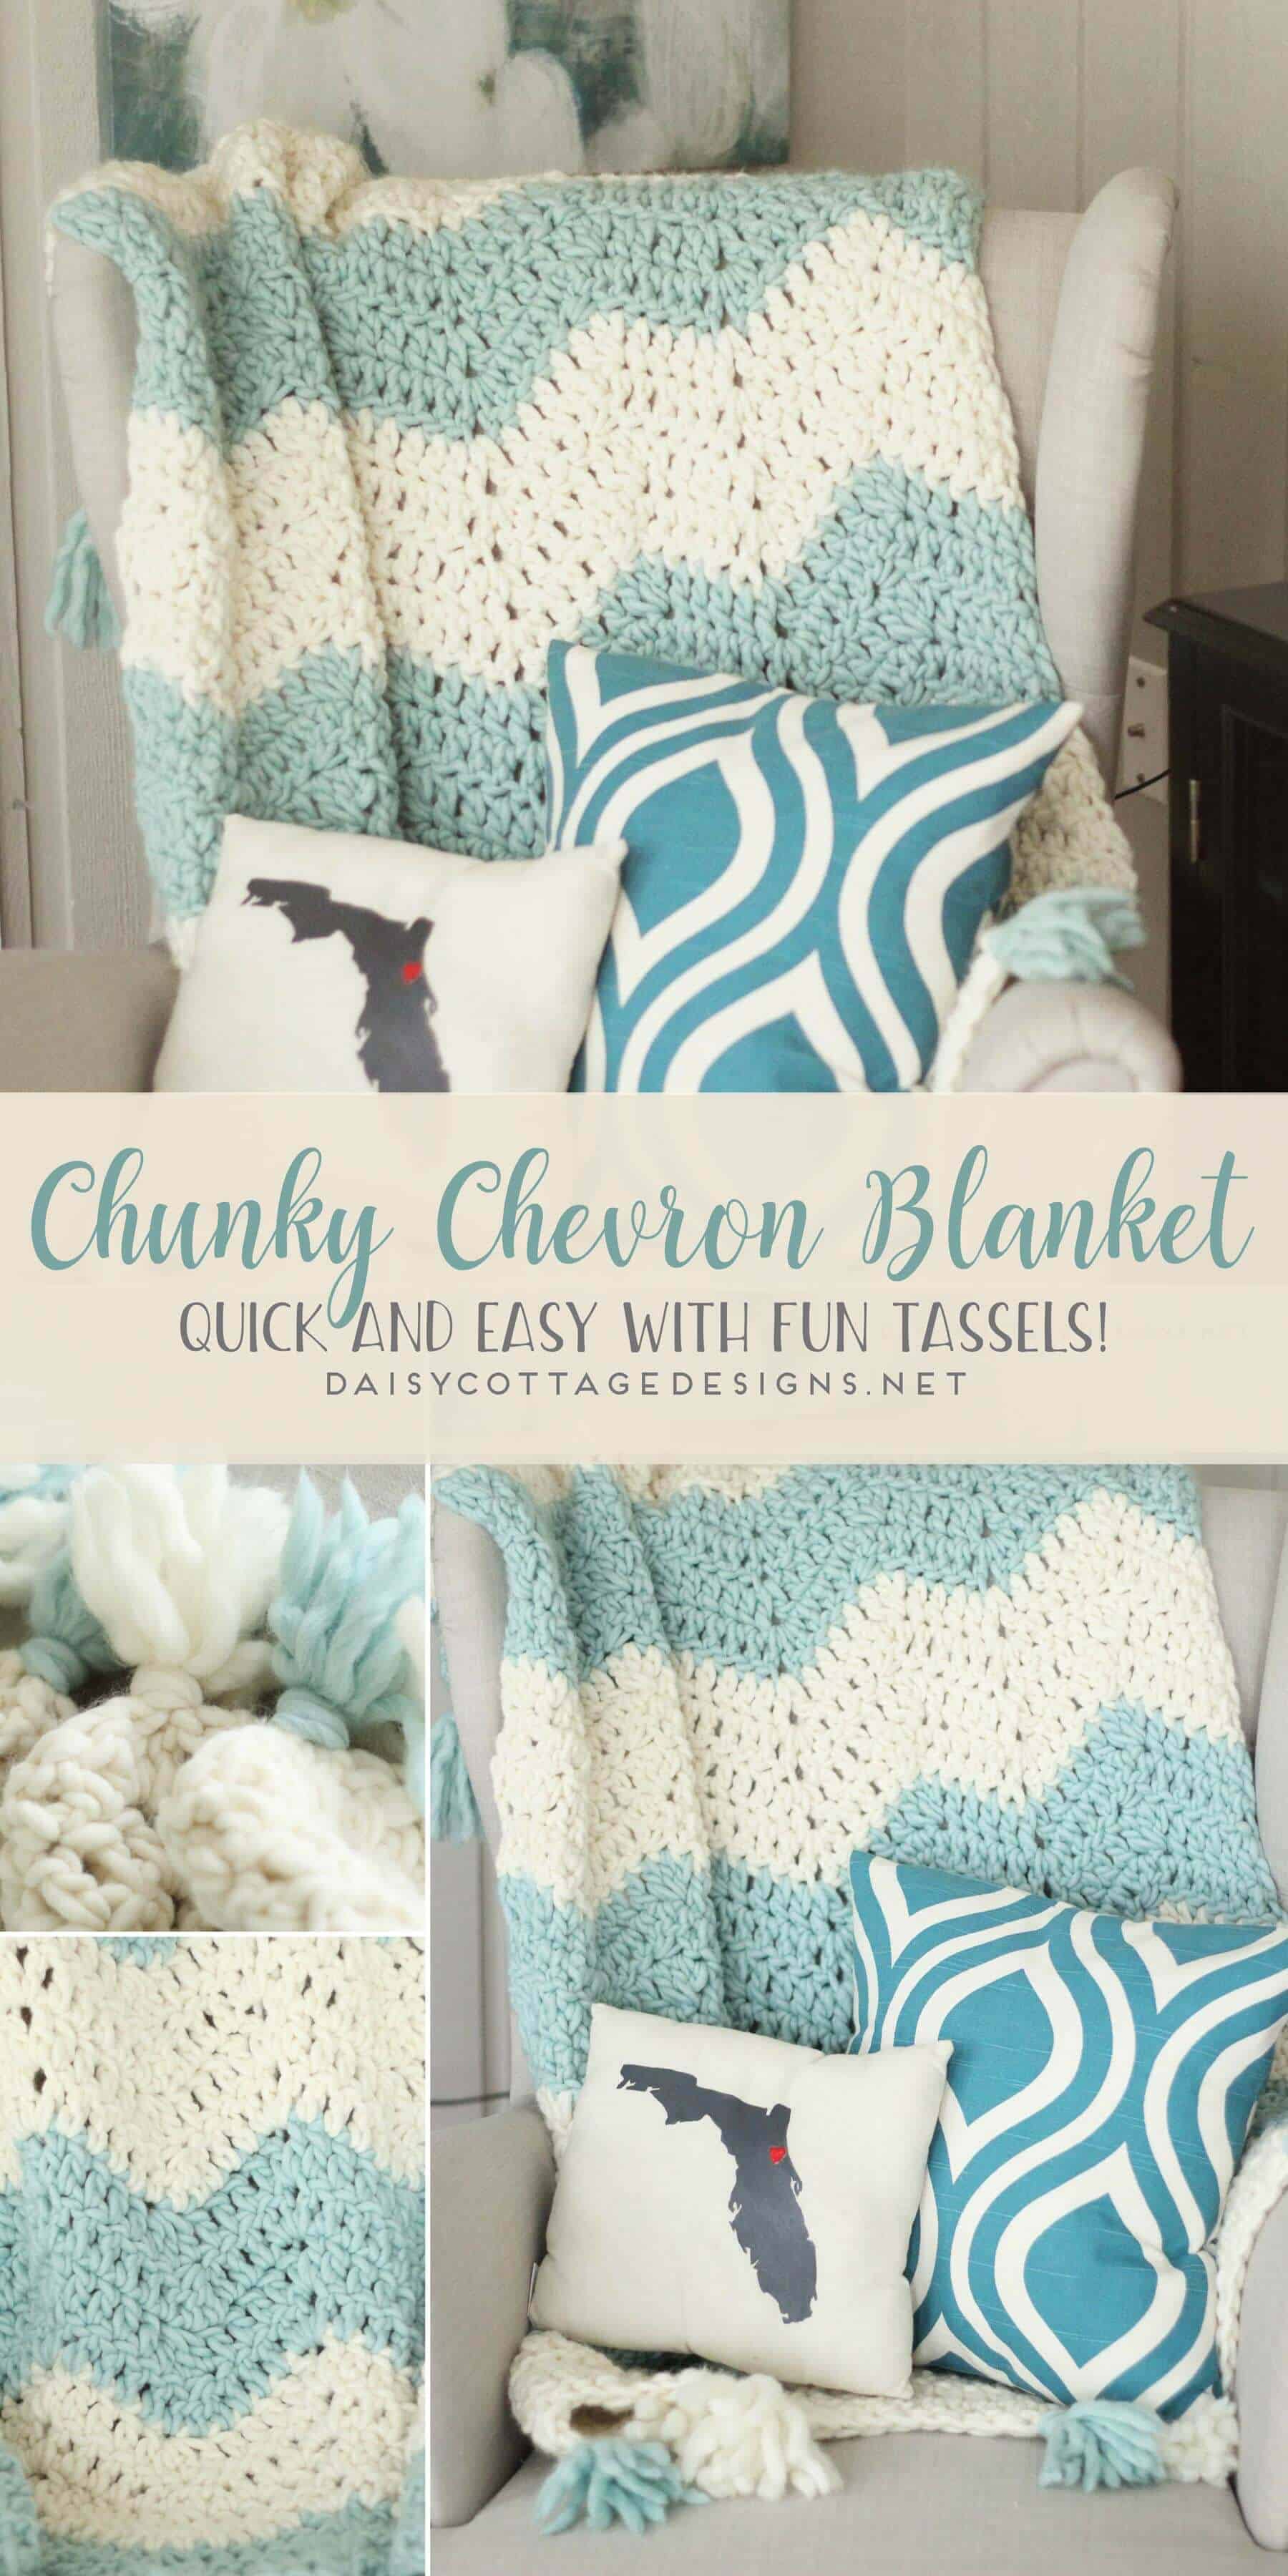 Chunky Chevron Crochet Blanket with Tassels. Beautiful and easy to make. Get a discount on this beautiful Yarn, too! | chunky chevron blanket, quick crochet blanket, bulky yarn patterns, Daisy Cottage Designs